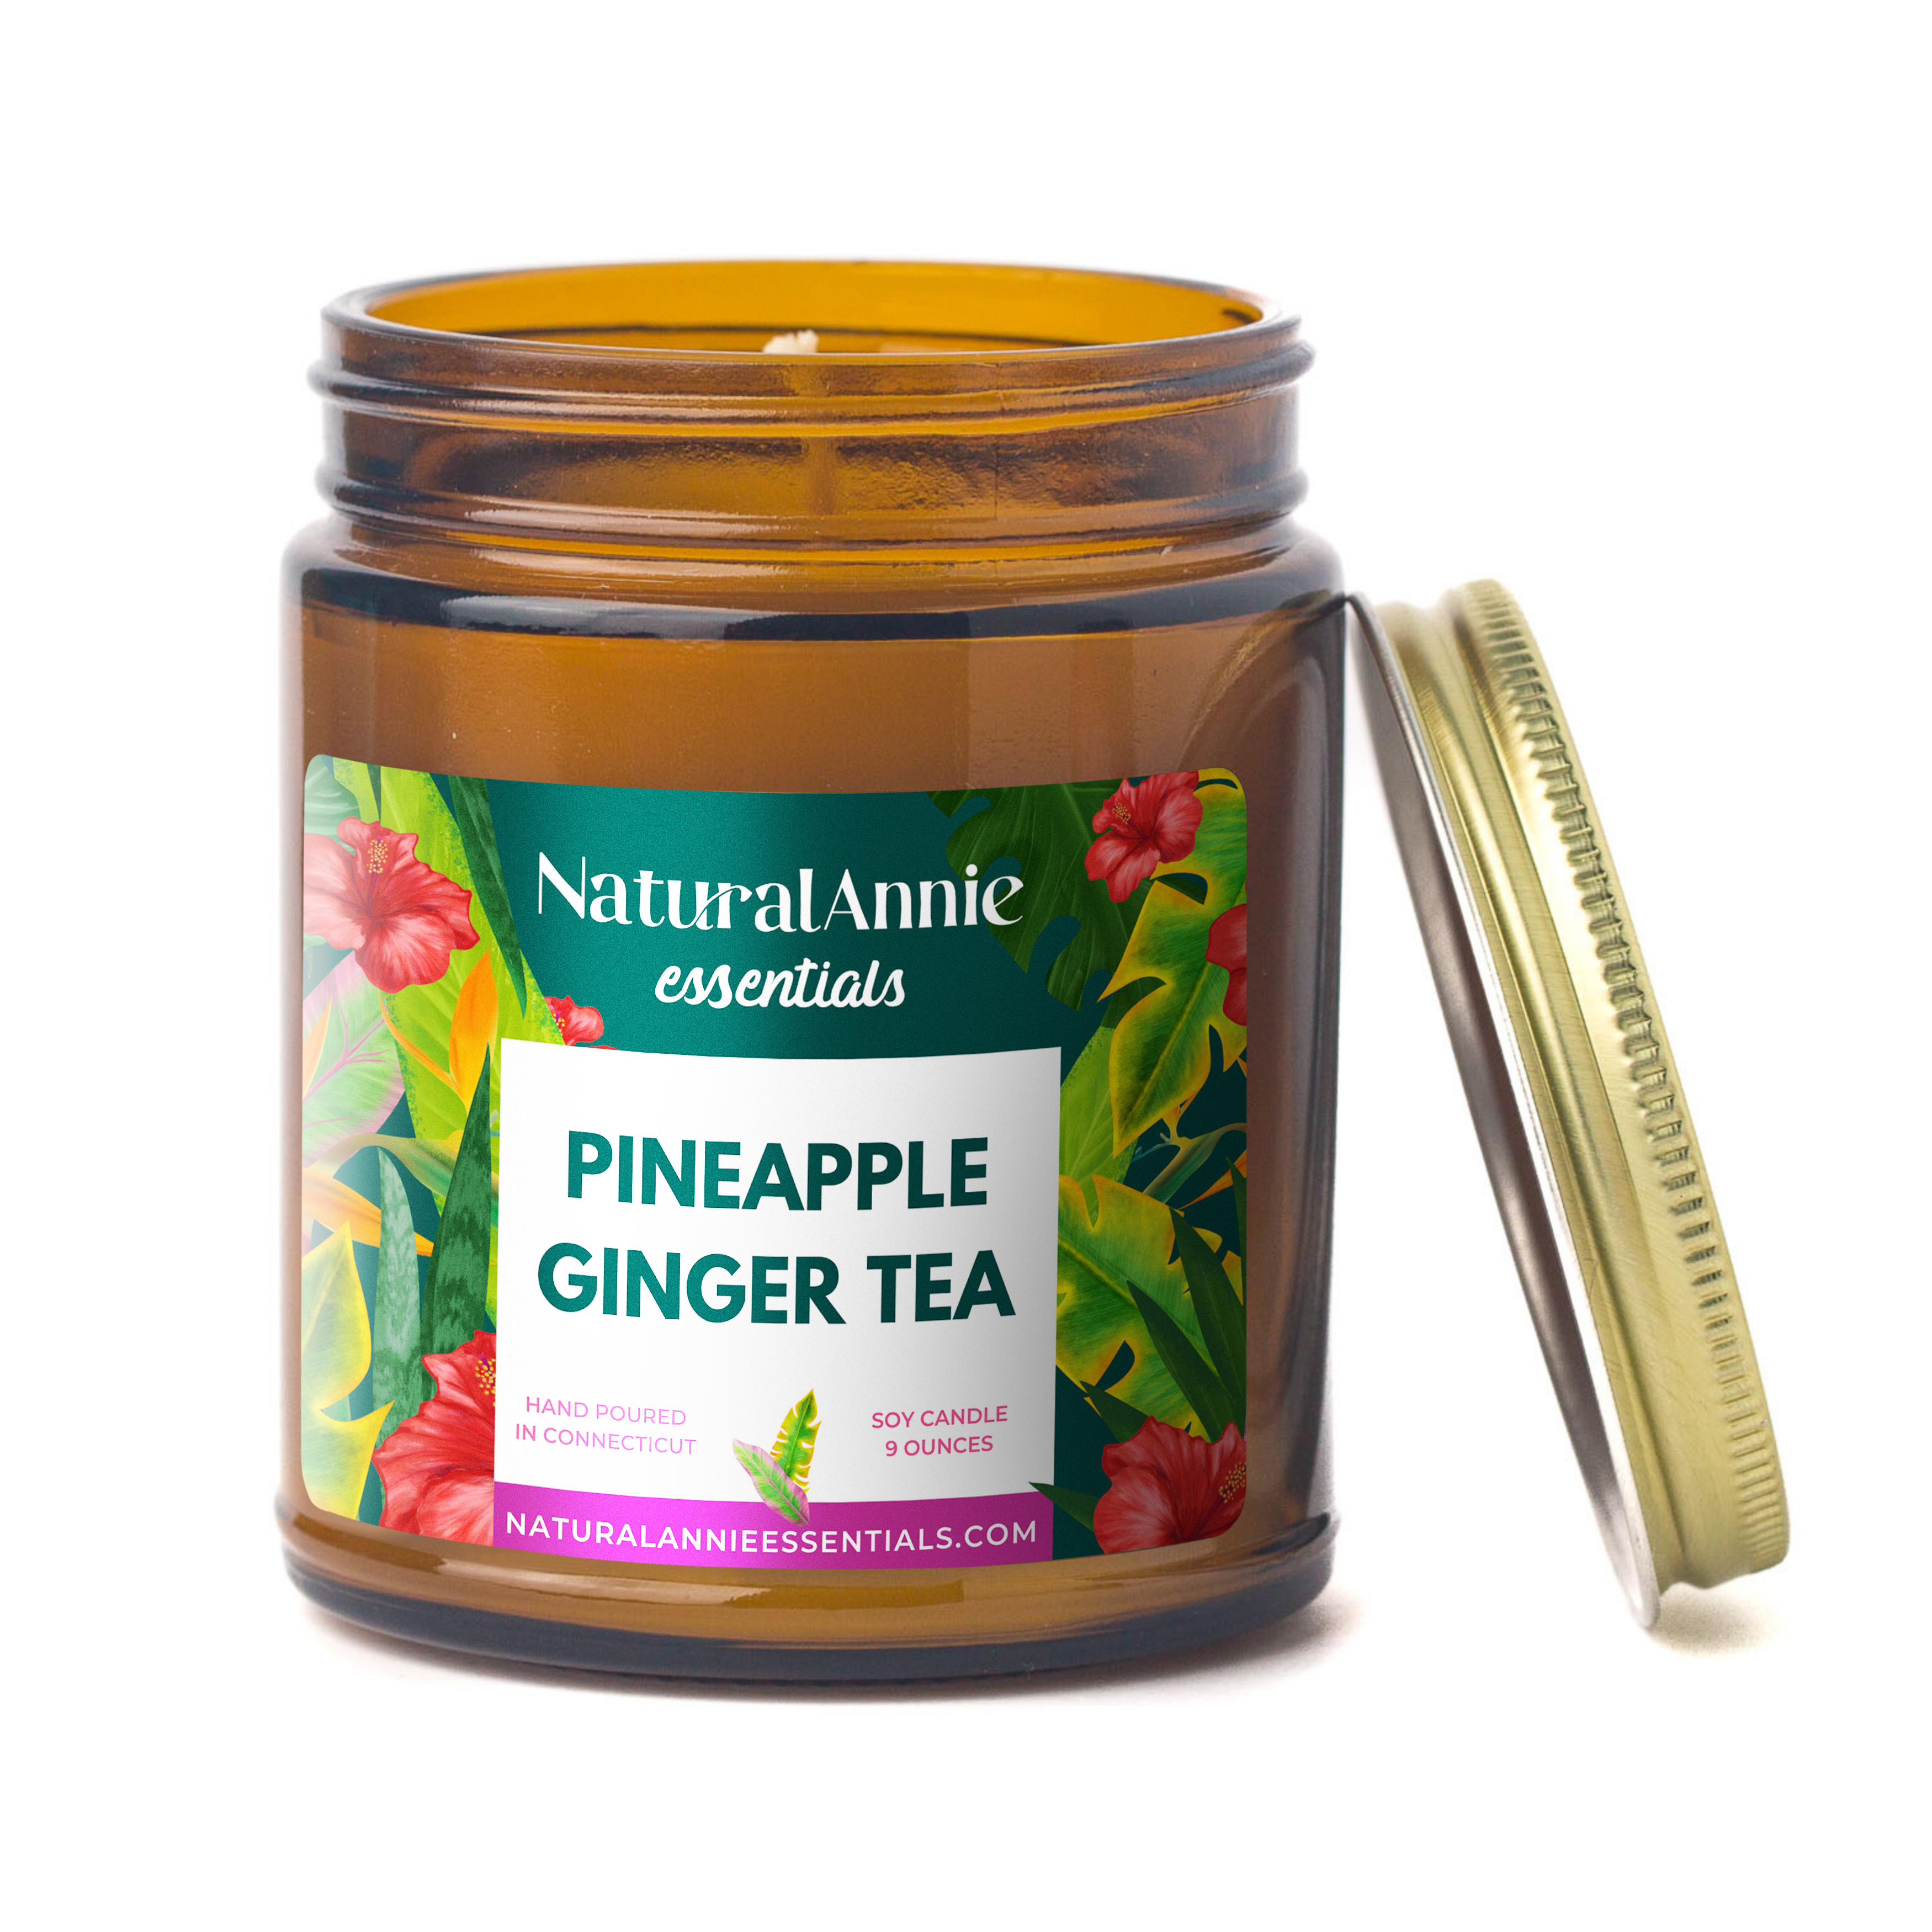 Pineapple Ginger Tea 9oz Scented Soy Candle